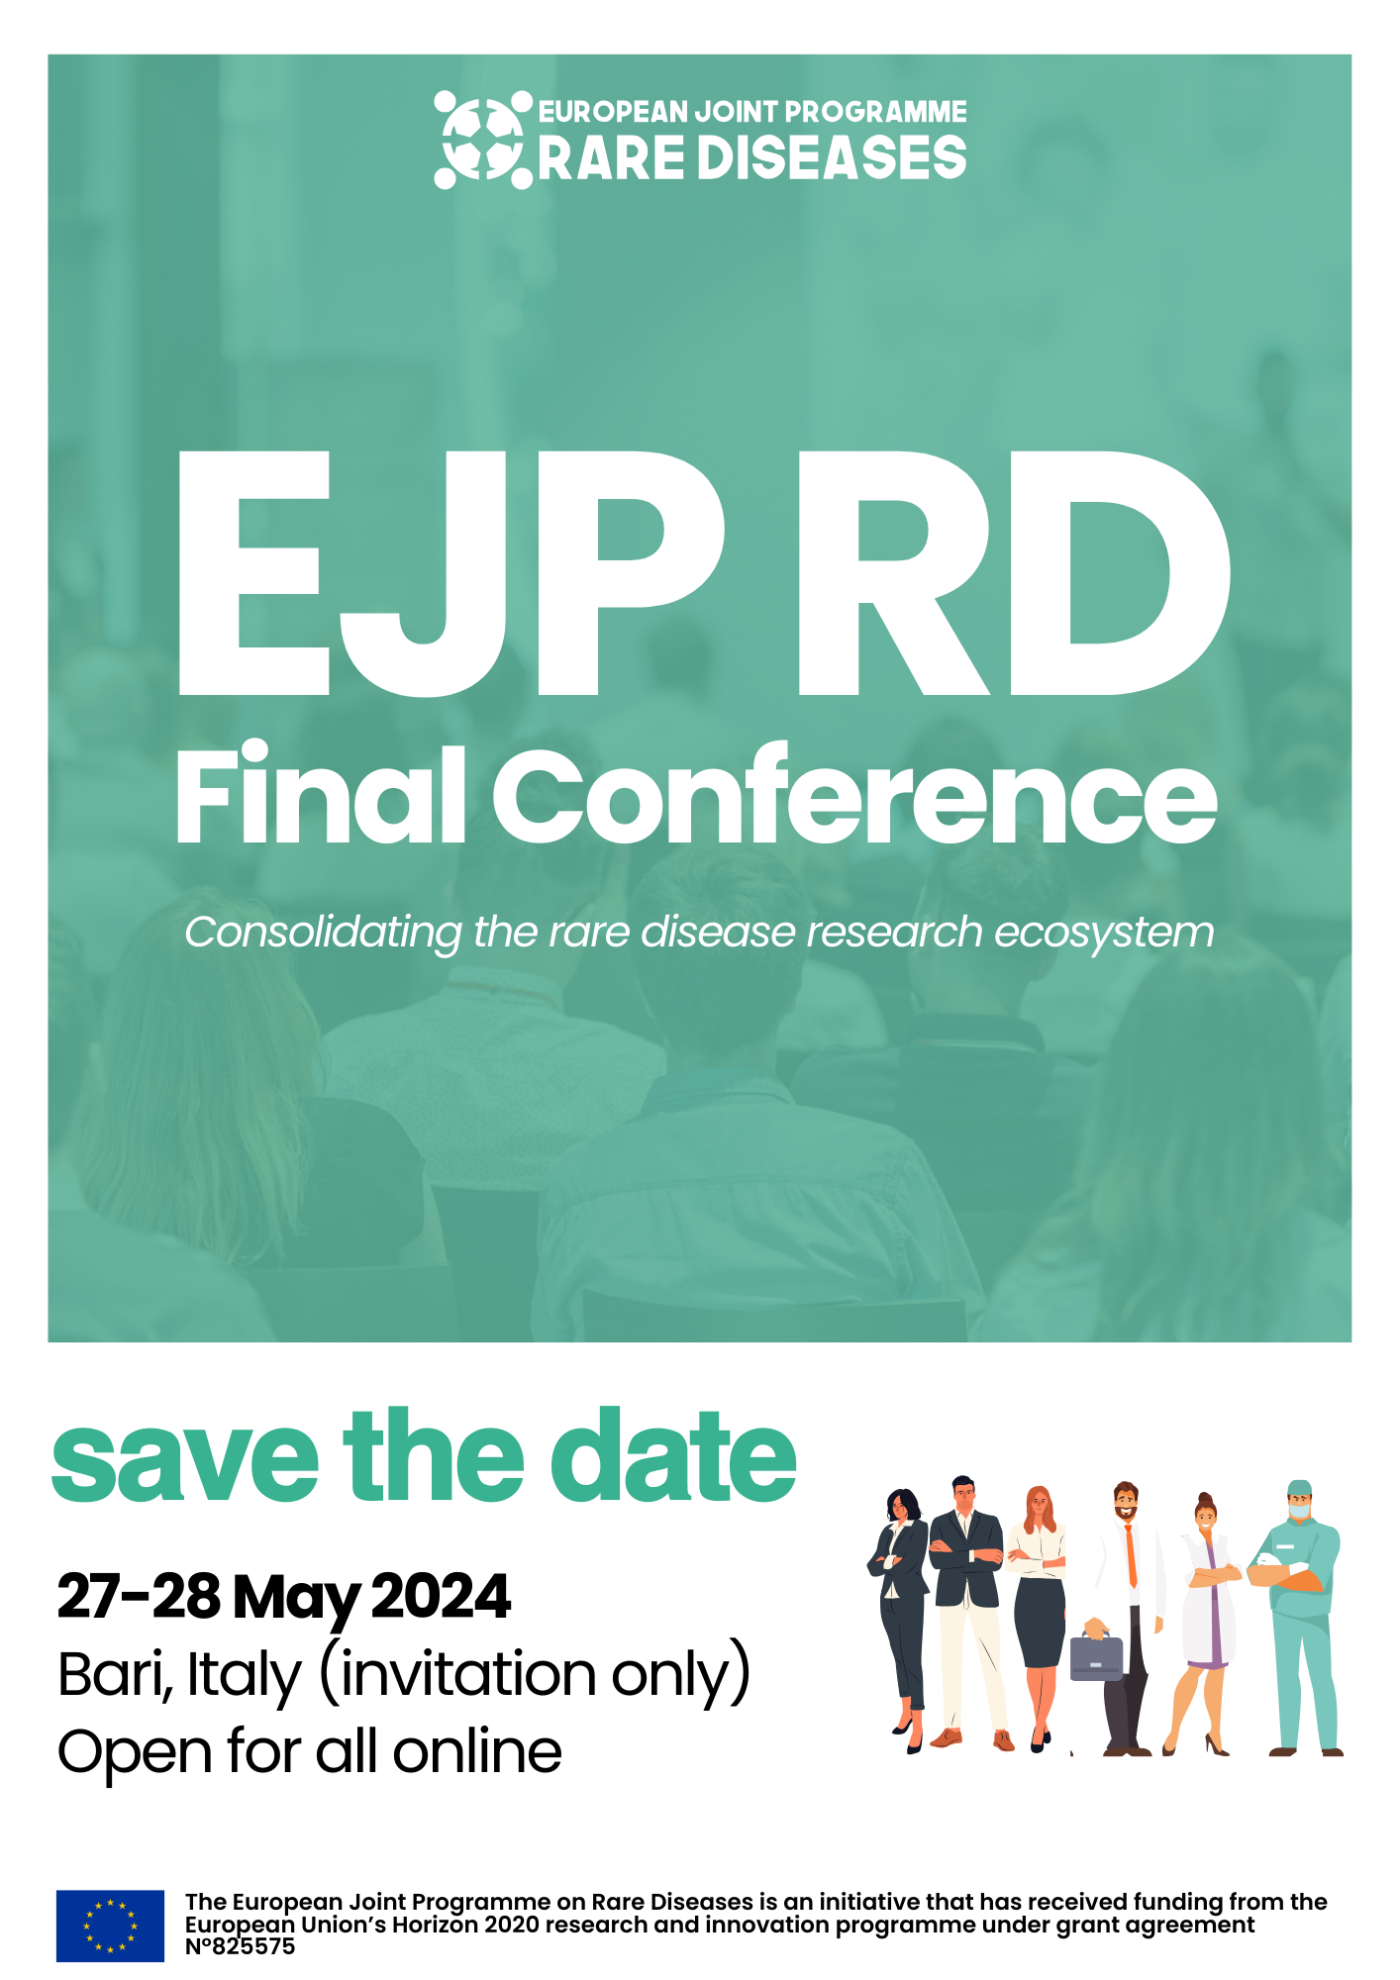 EJP RD Final Conference | 27 - 28 May 2024